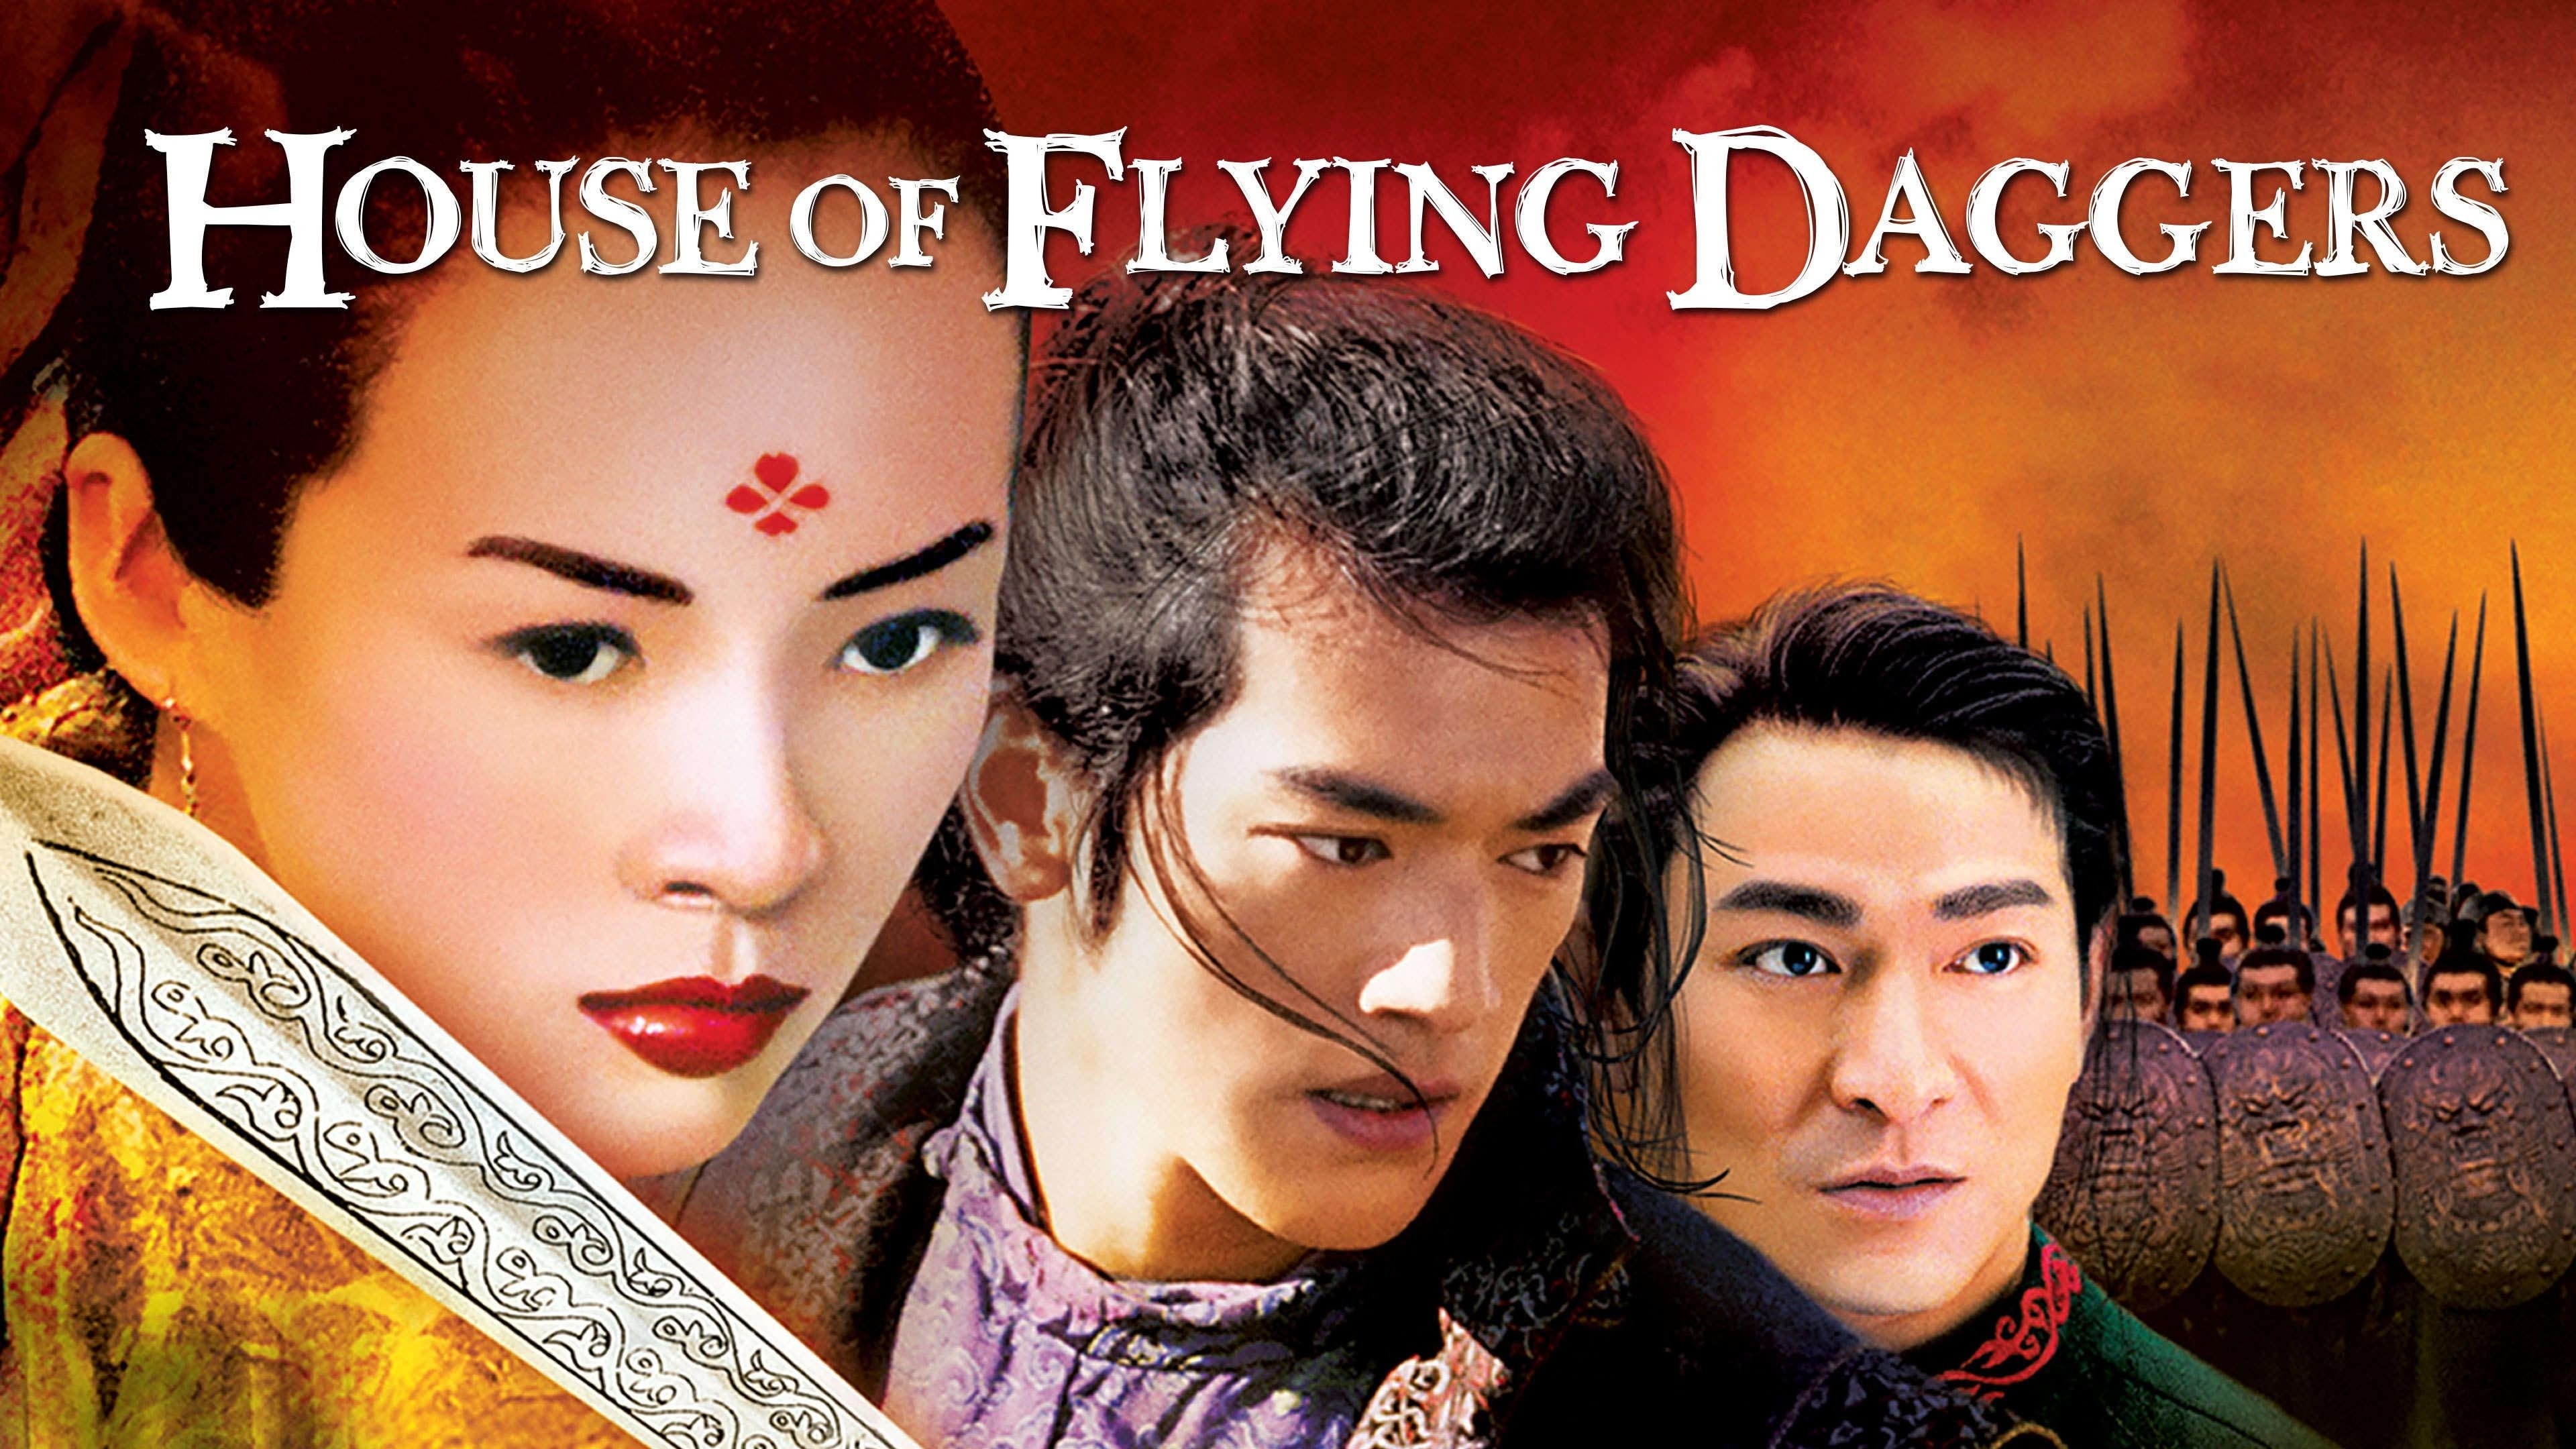 House of Flying Daggers, Free online streaming, Martial arts epic, Unforgettable story, 3840x2160 4K Desktop